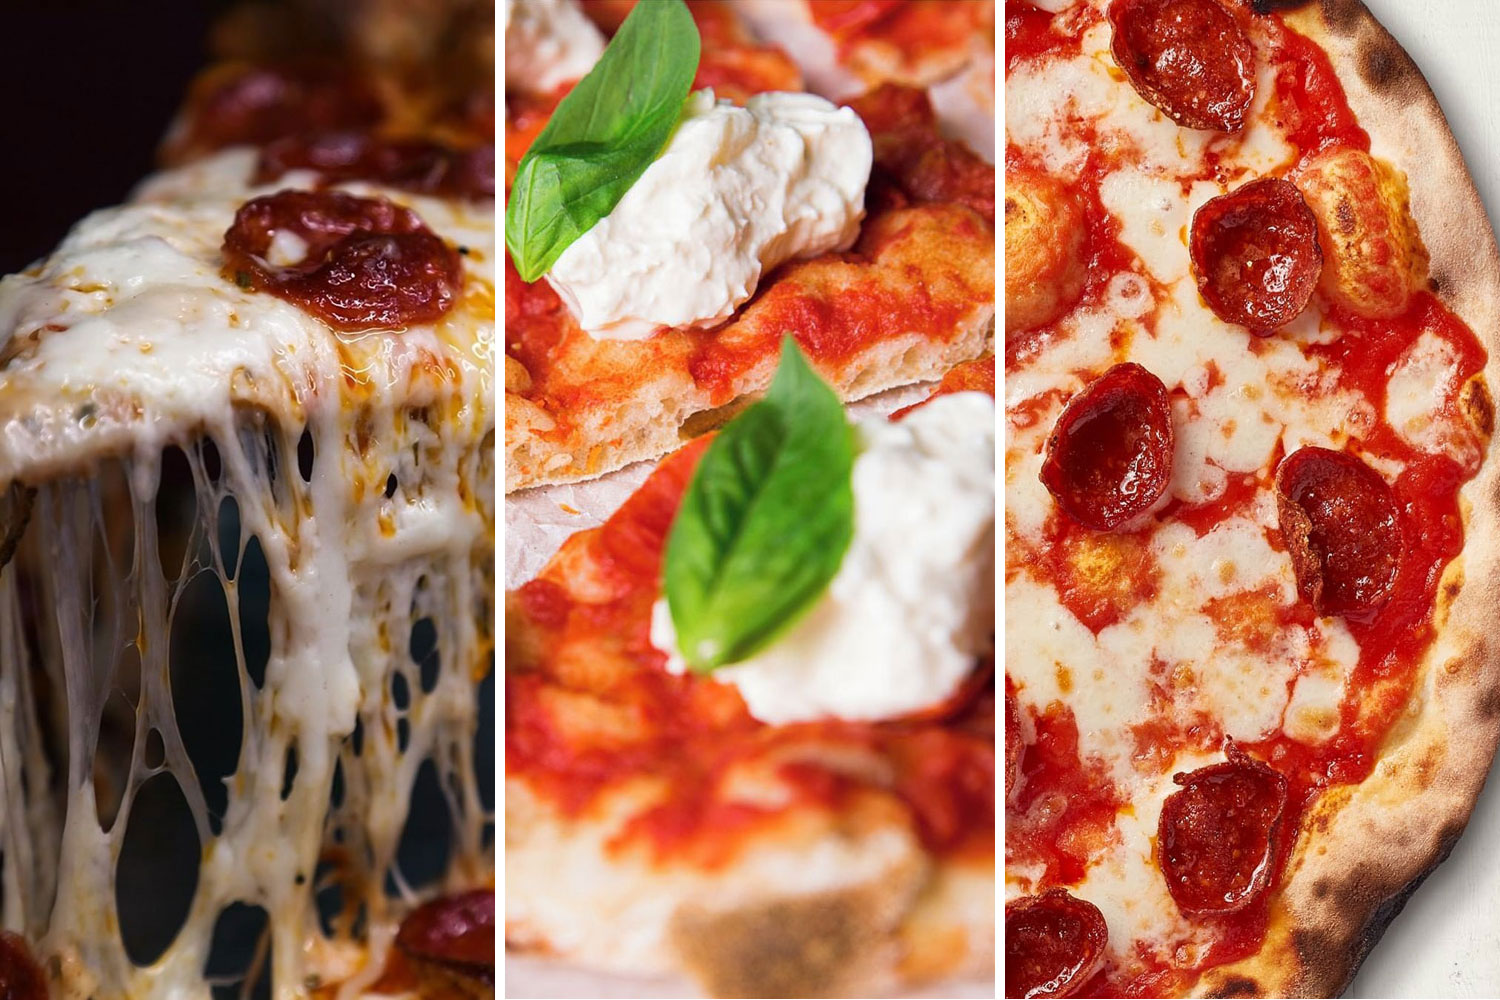 Warning: this pizza appreciation post will make you hungry | Time Out Dubai